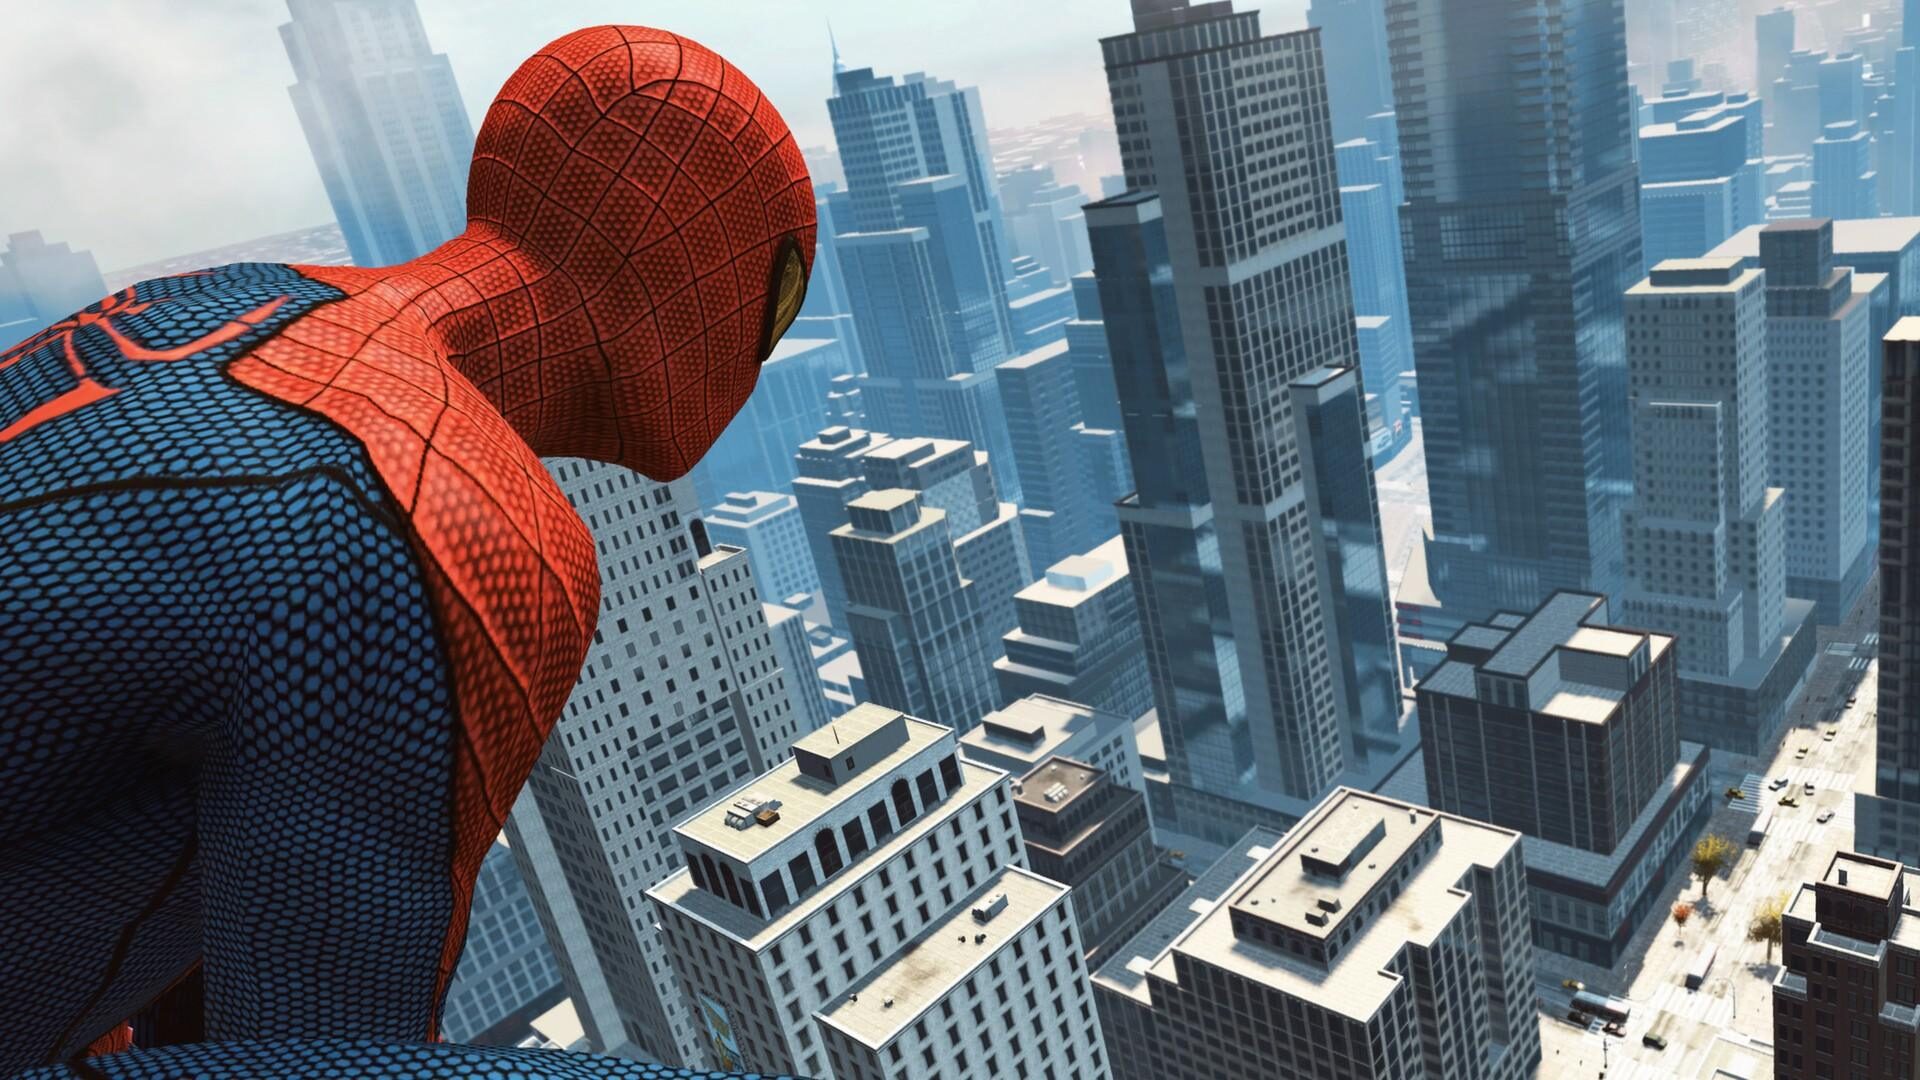 Buy The Amazing Spider-Man Steam Key EUROPE - Cheap - !